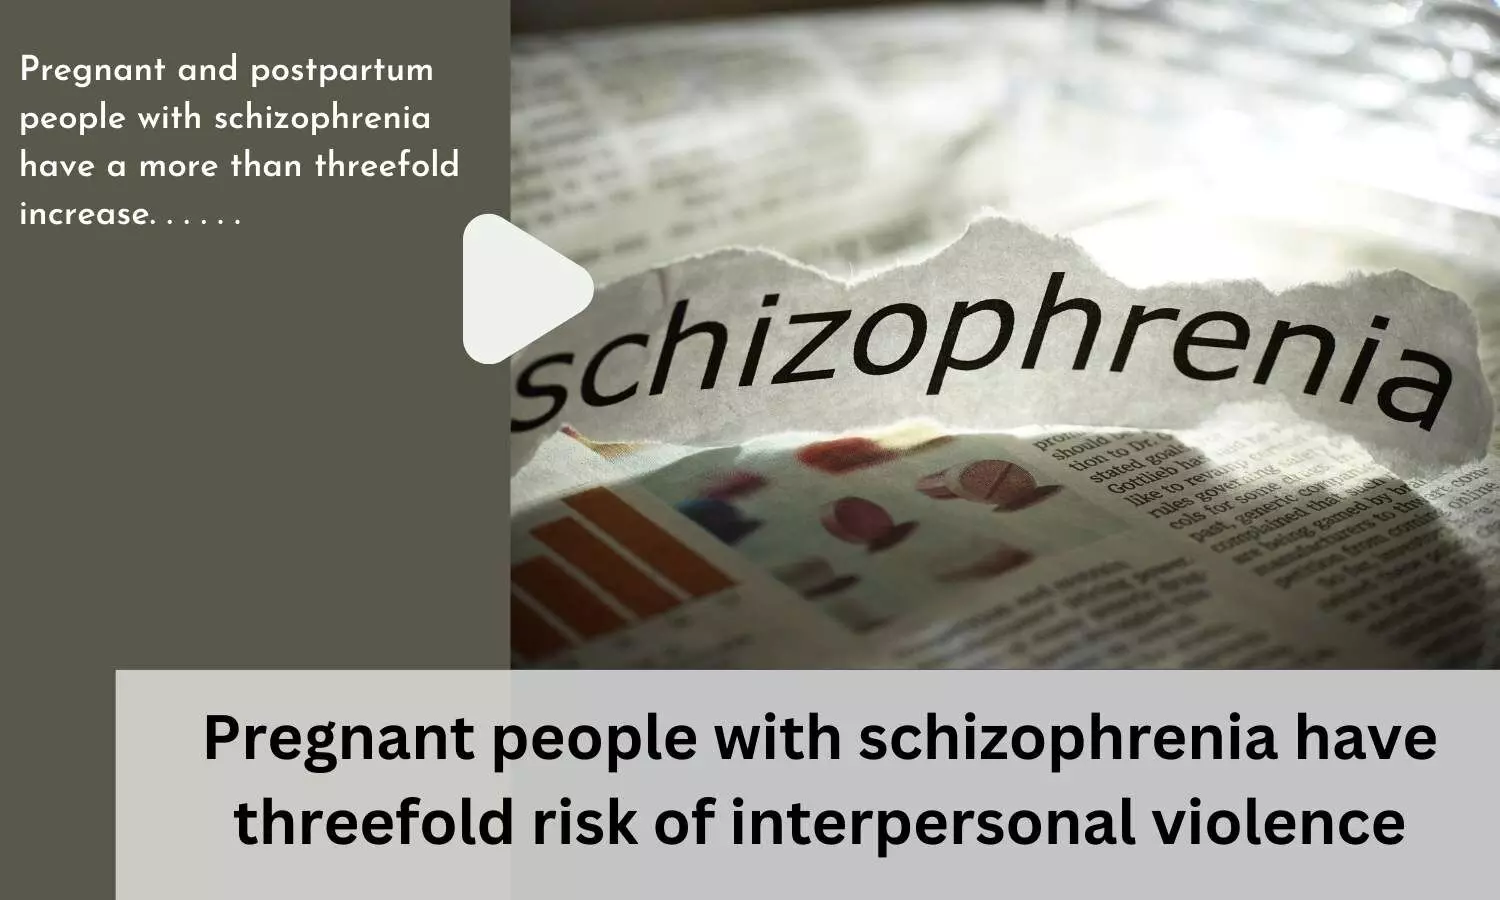 Pregnant people with schizophrenia have threefold risk of interpersonal violence